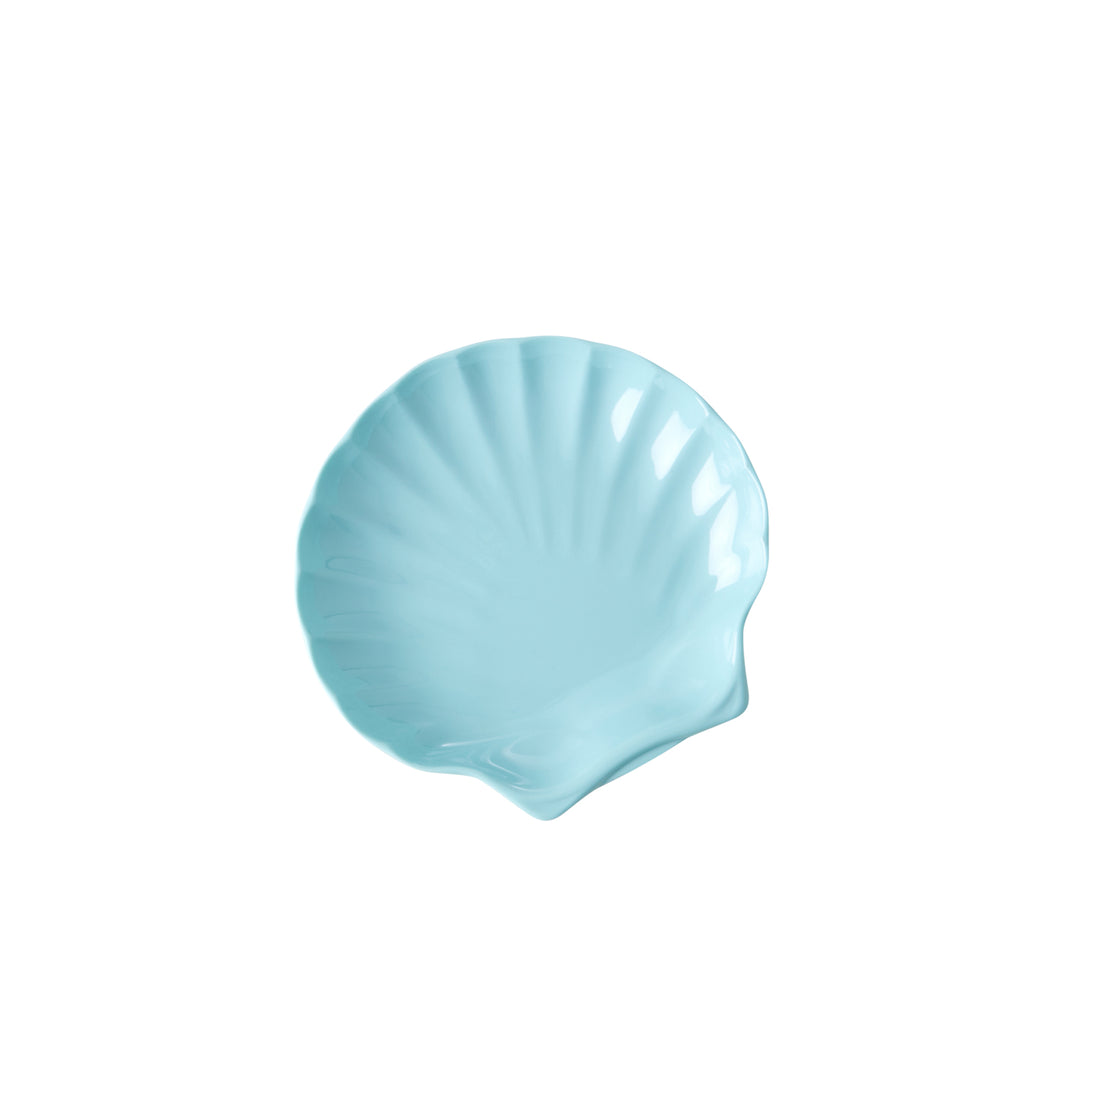 rice-dk-melamine-dipping-plate-in-sea-shell-shape-arctic-blue-small-rice-melse-sab-